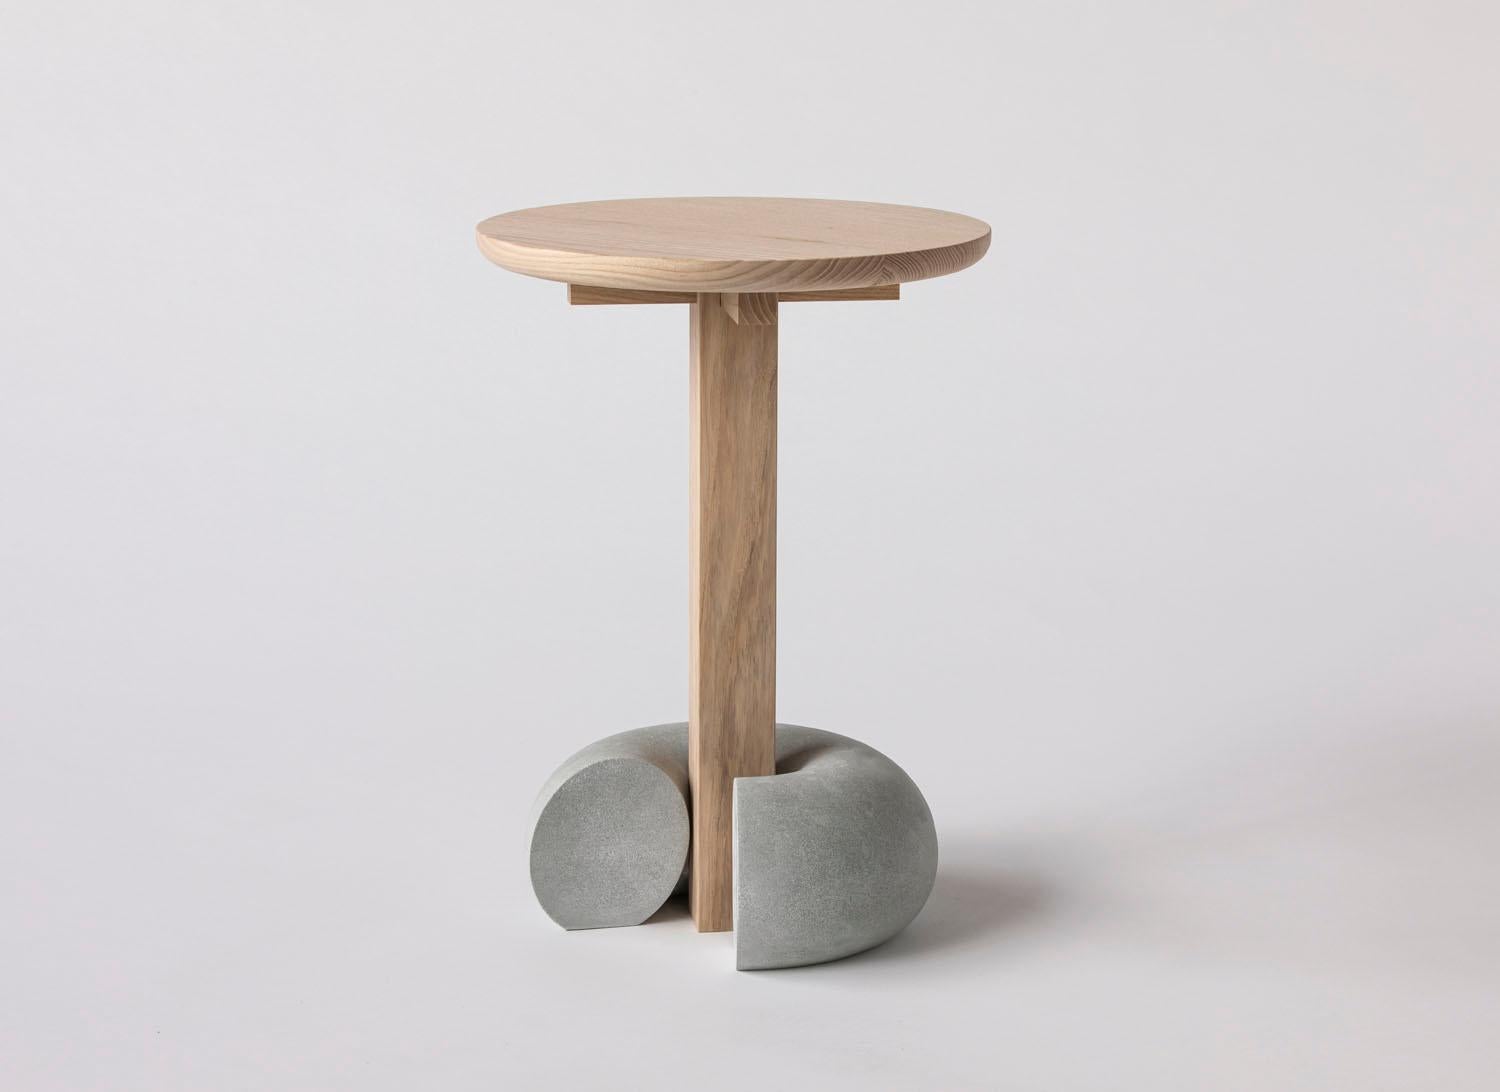 Modern Poise Contemporary Stool Table in Solid Ash Hardwood and Concrete